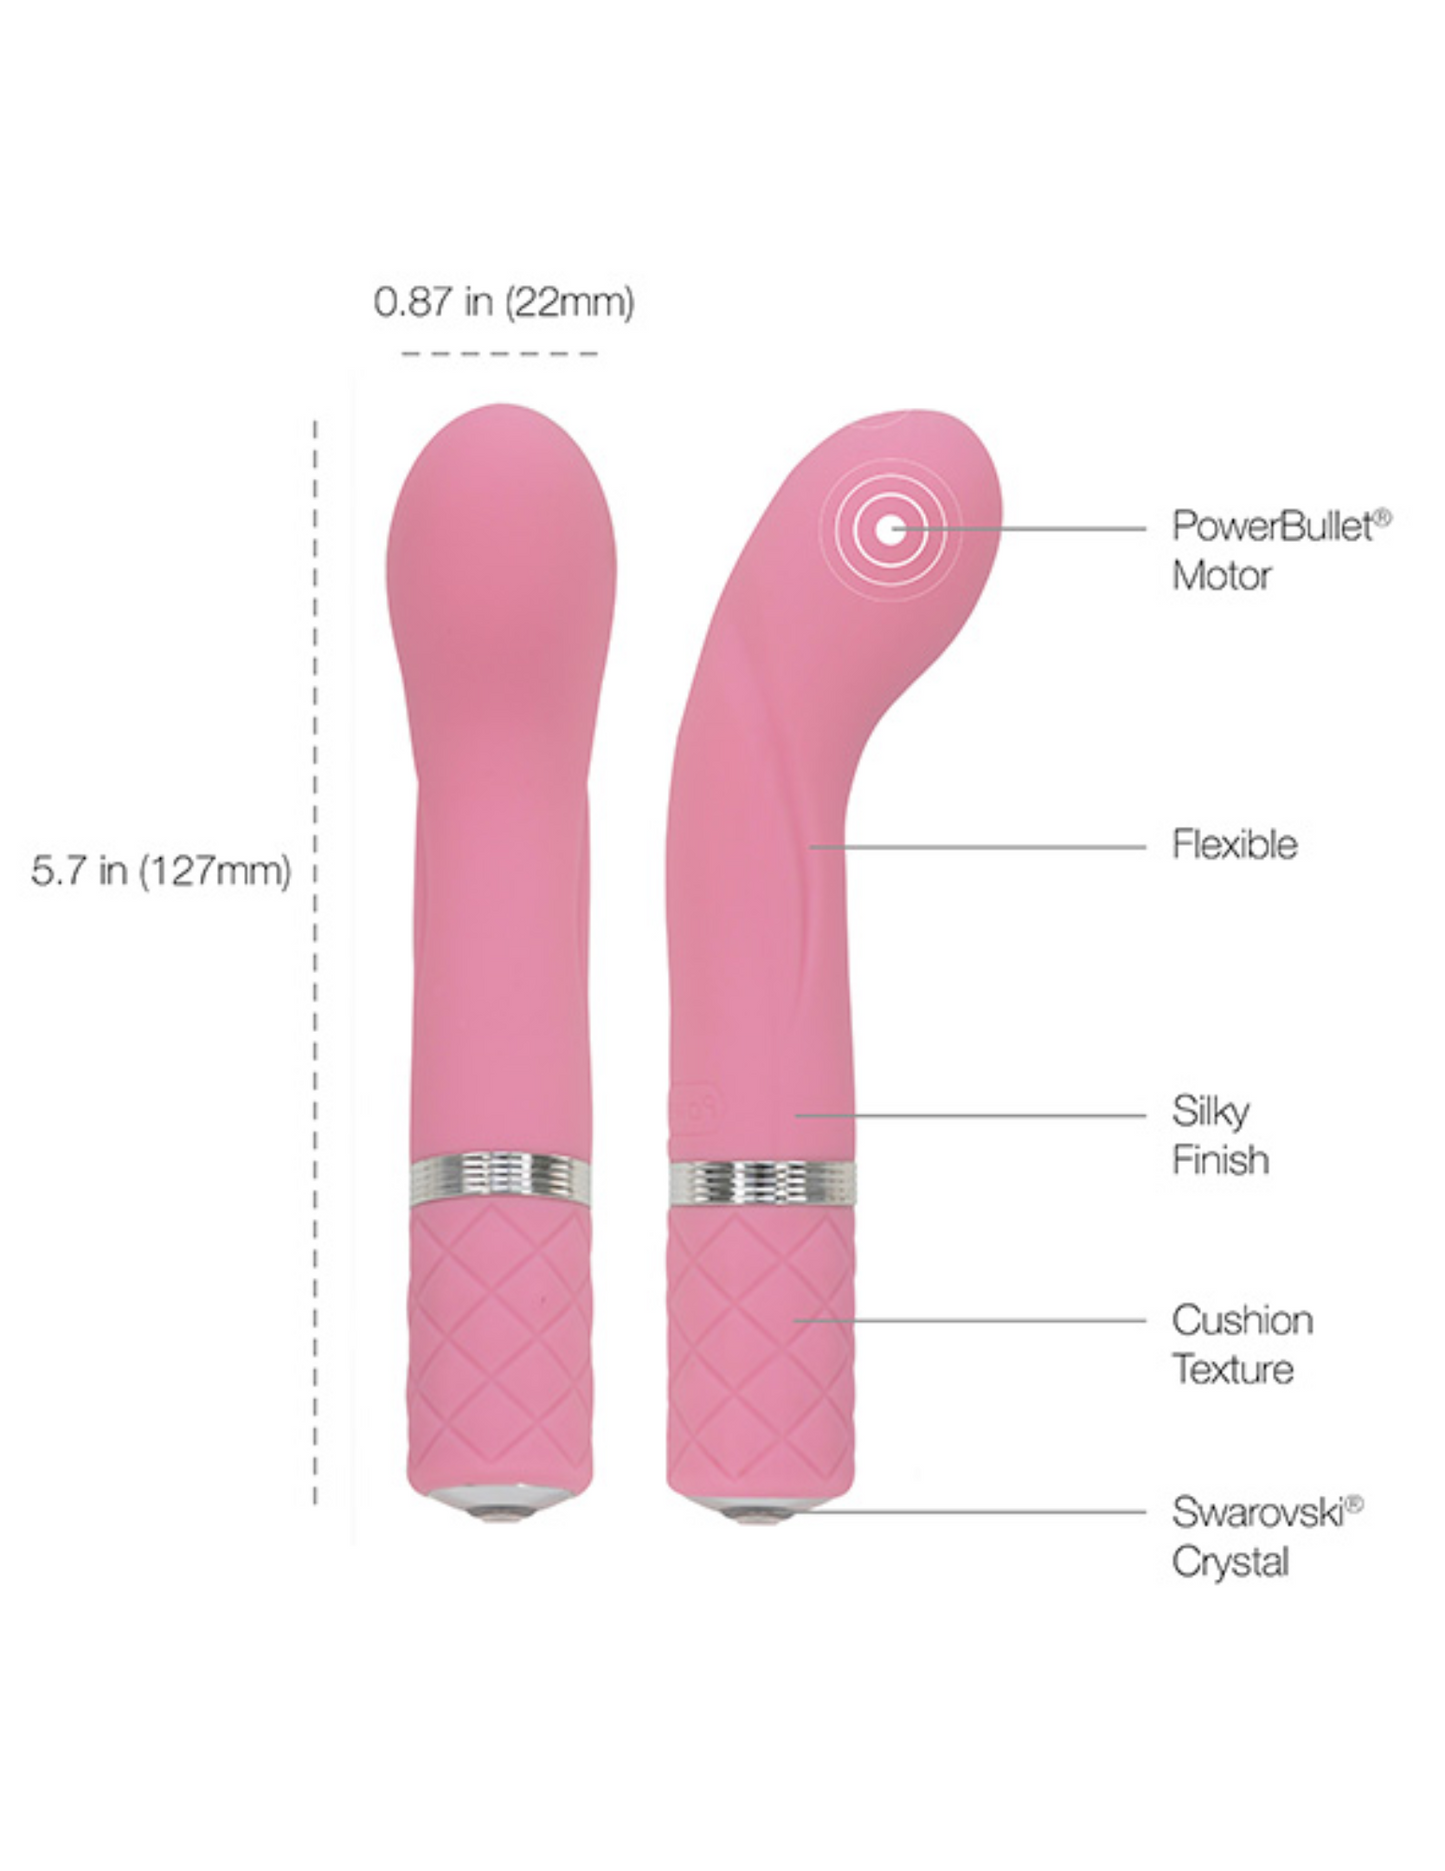 Diagram shows the dimensions for the Pillow Talk Racy bullet from BMS Factory (pink).